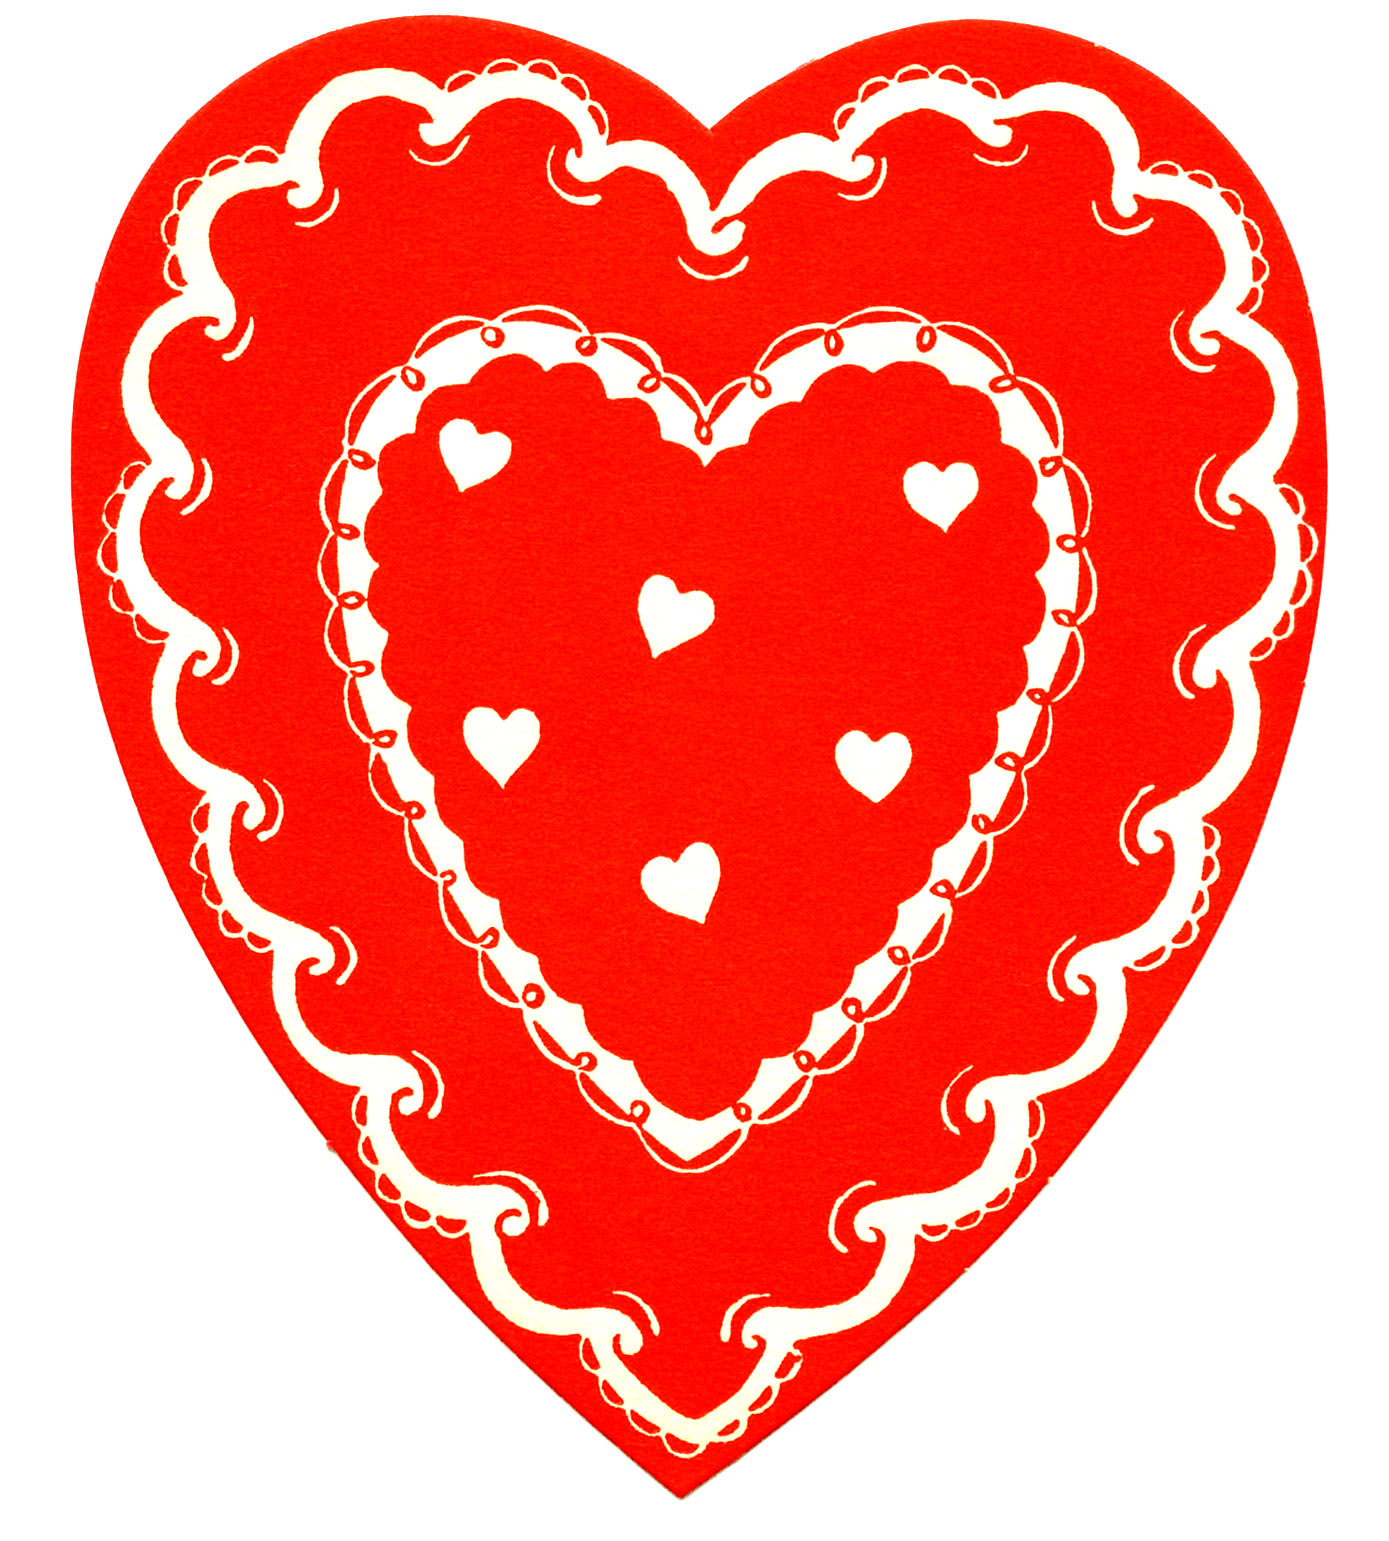 Vintage Valentine's Clip Art - Classic Red and White Heart - The